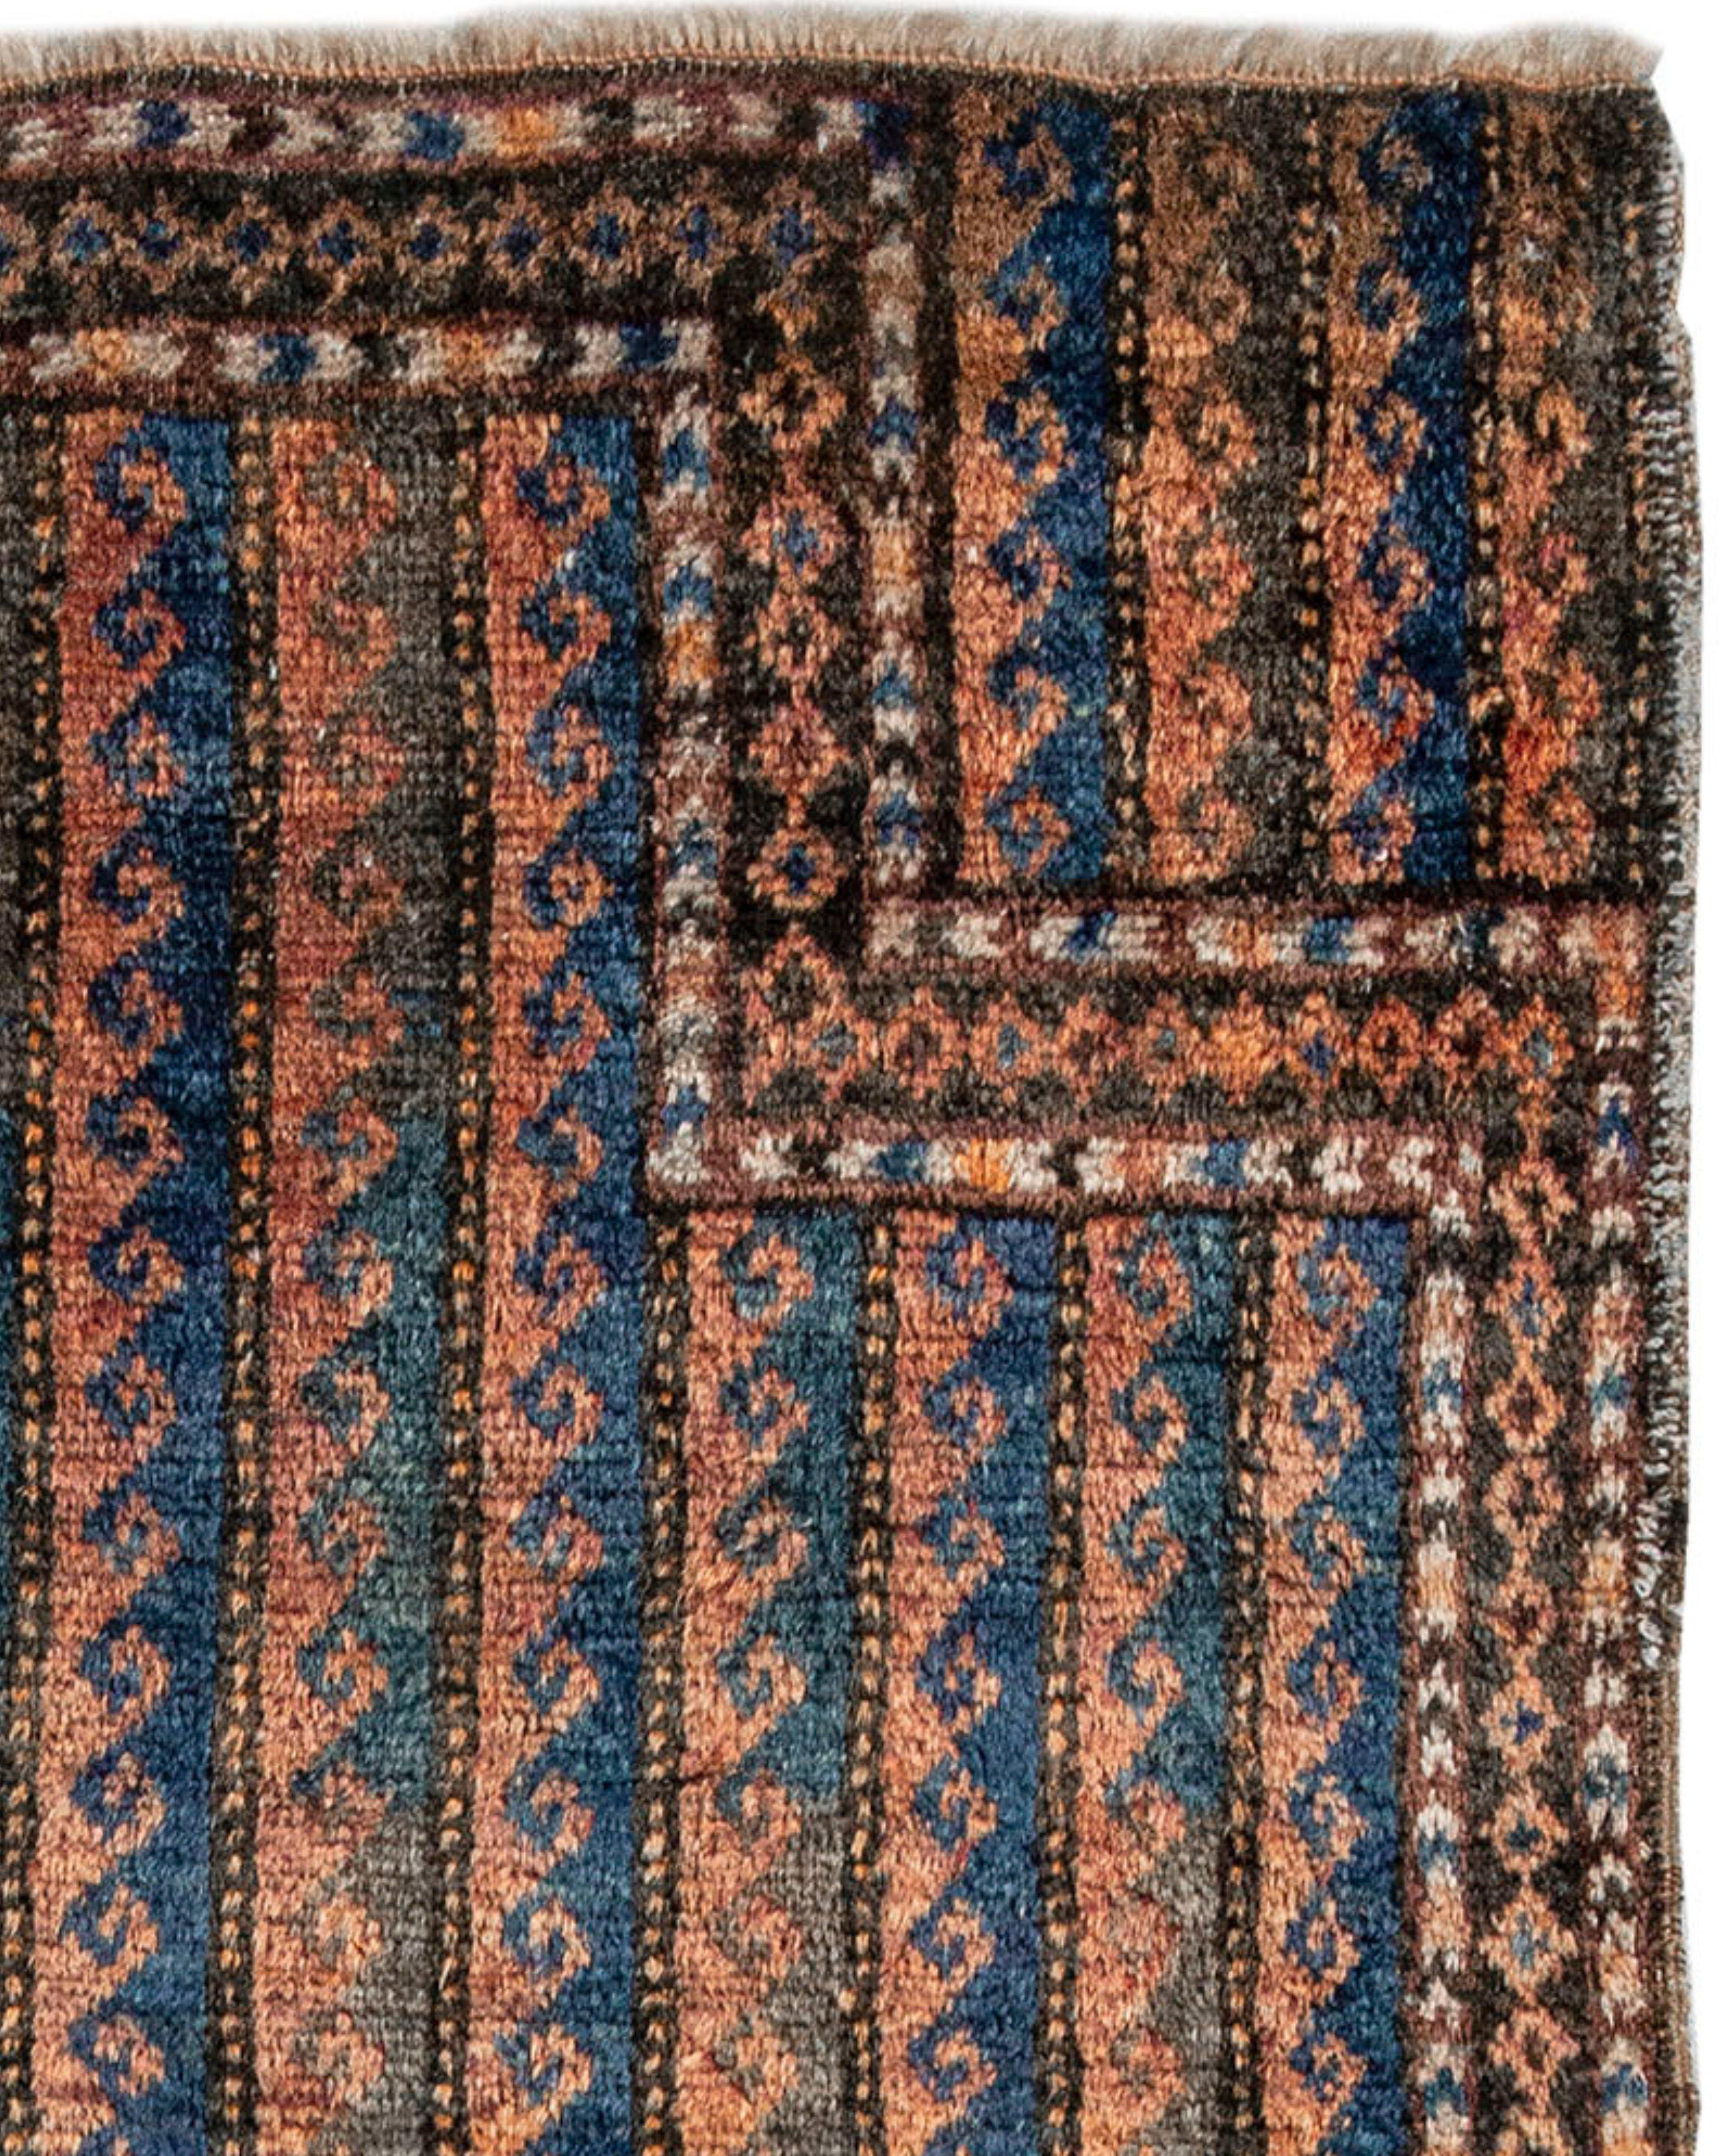 Baluch Prayer Rug, Late 19th Century

Additional Information:
Dimensions: 2'10